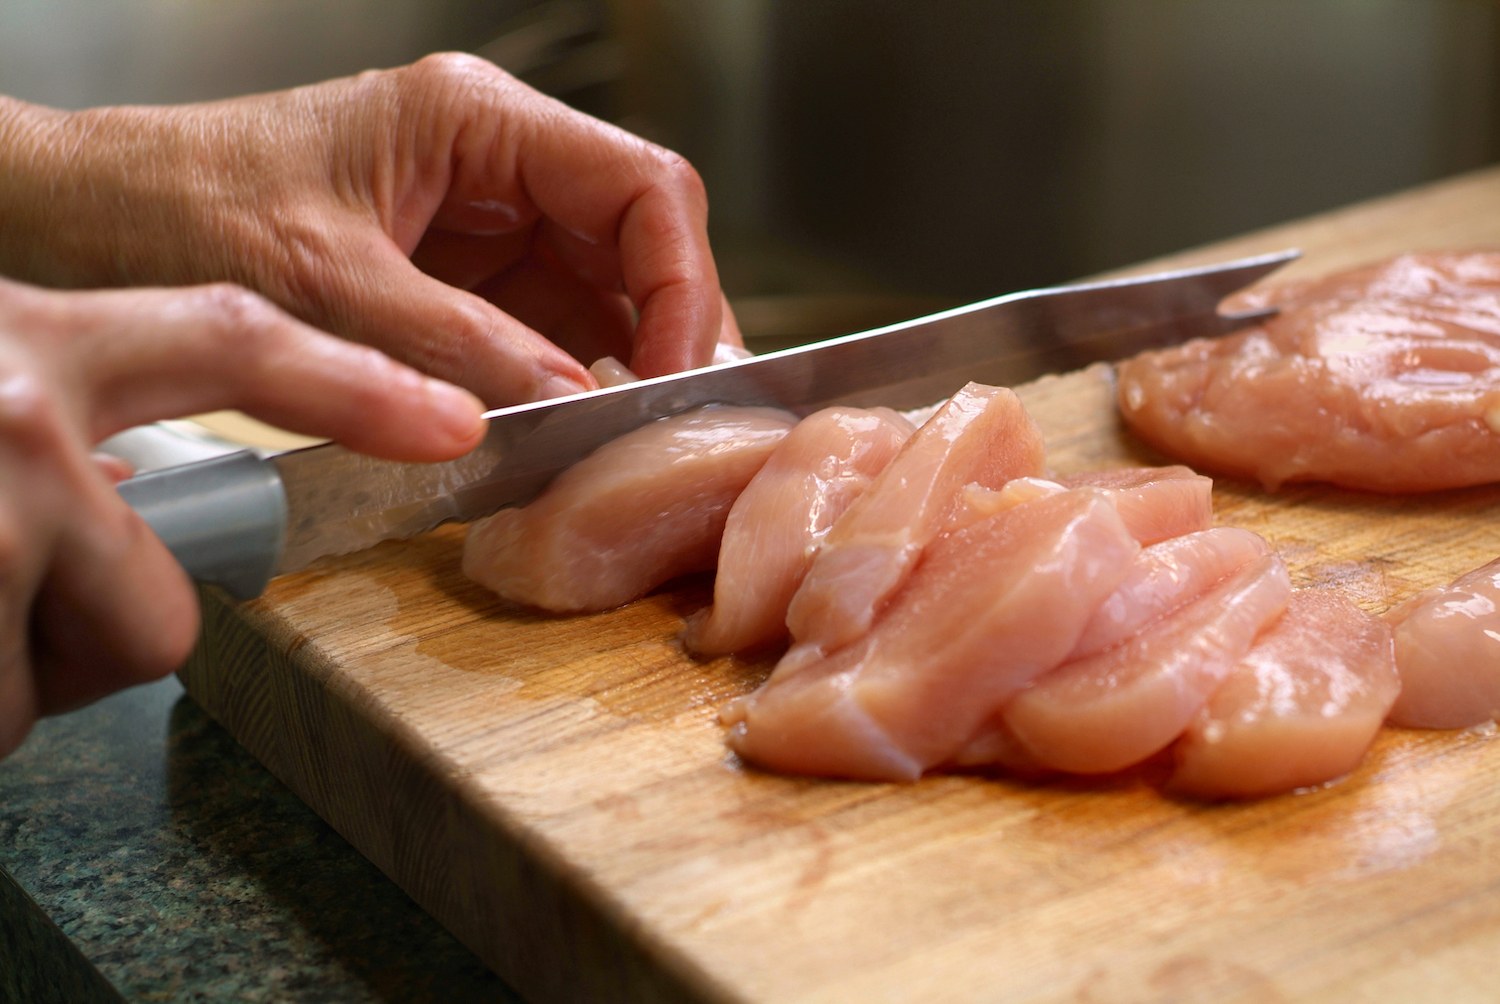 Horizontal image of raw chicken breasts being sliced on a wooden cutting board in a kitchen setting. There is motion blur in the hands and the knife to create a feeling of action, while focus is on the chicken. The photograph was taken with shallow depth of field.